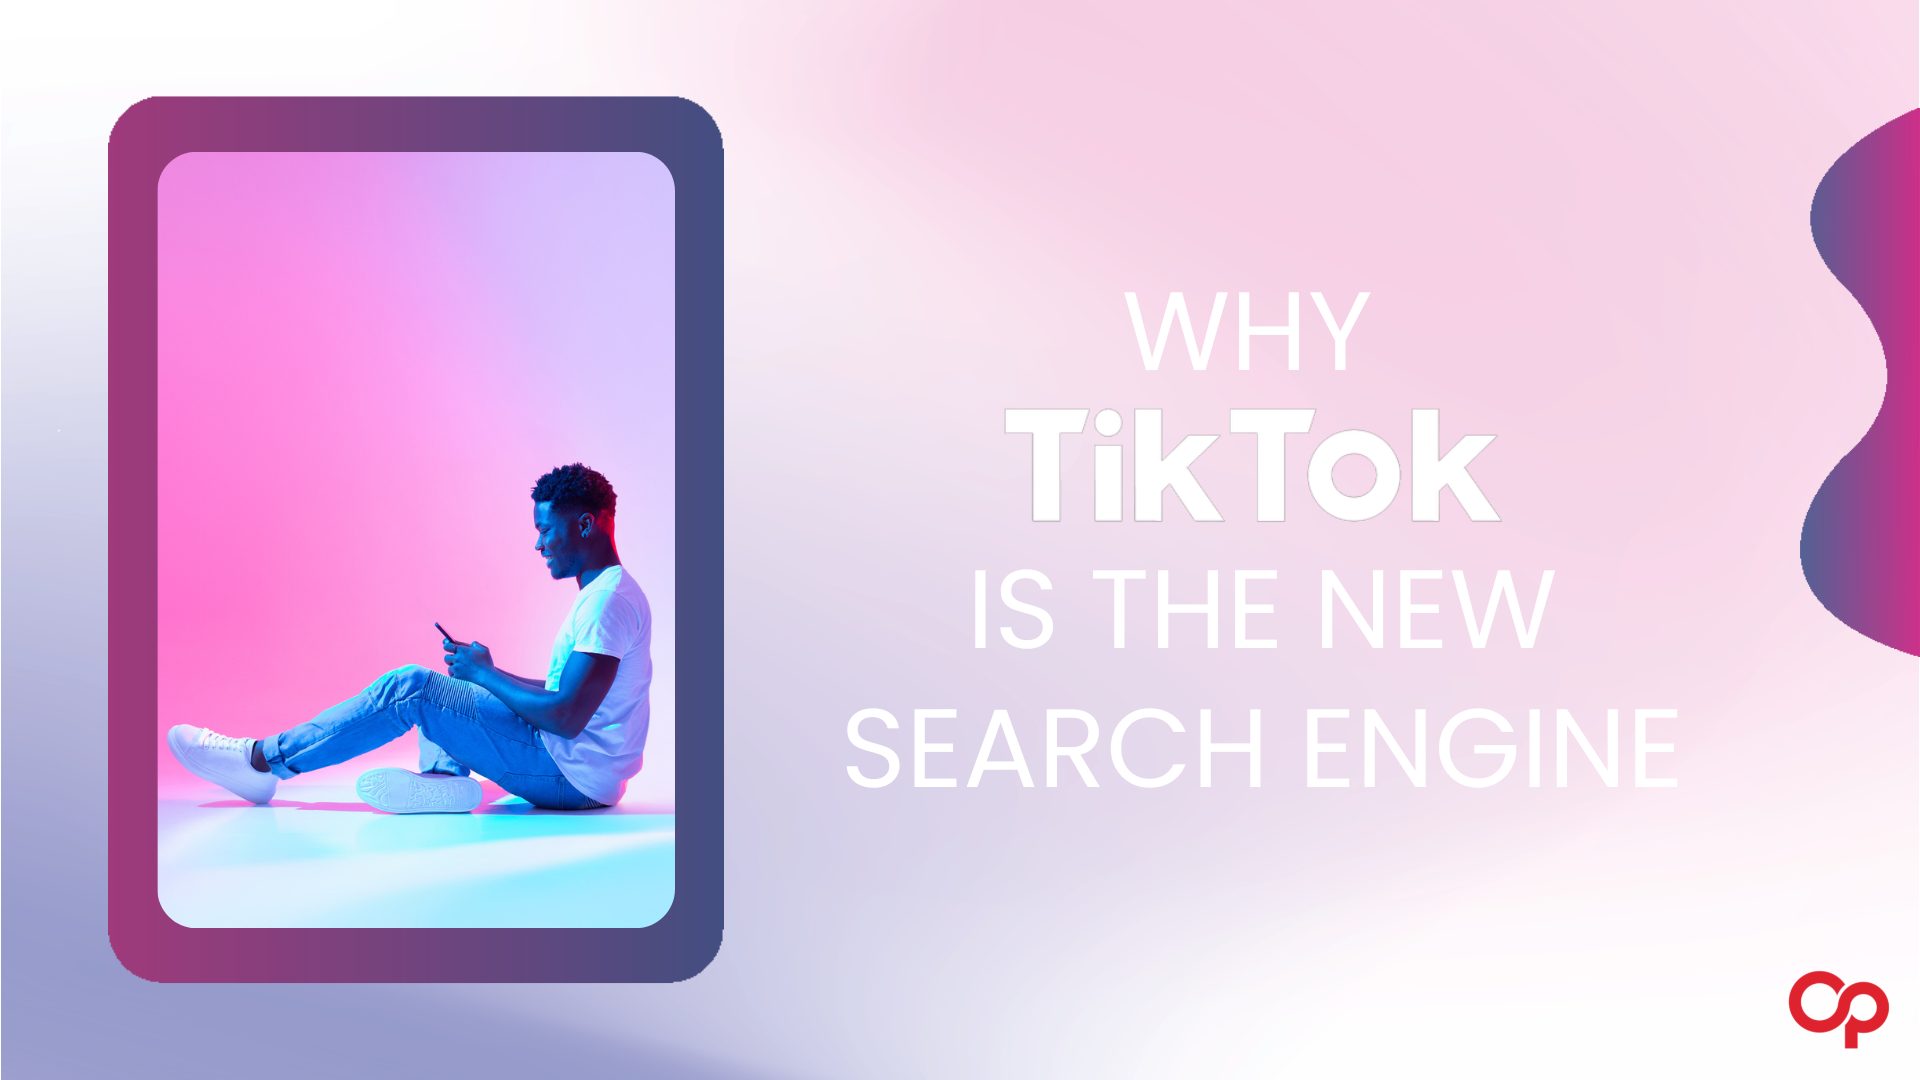 TikTok is the new search engine